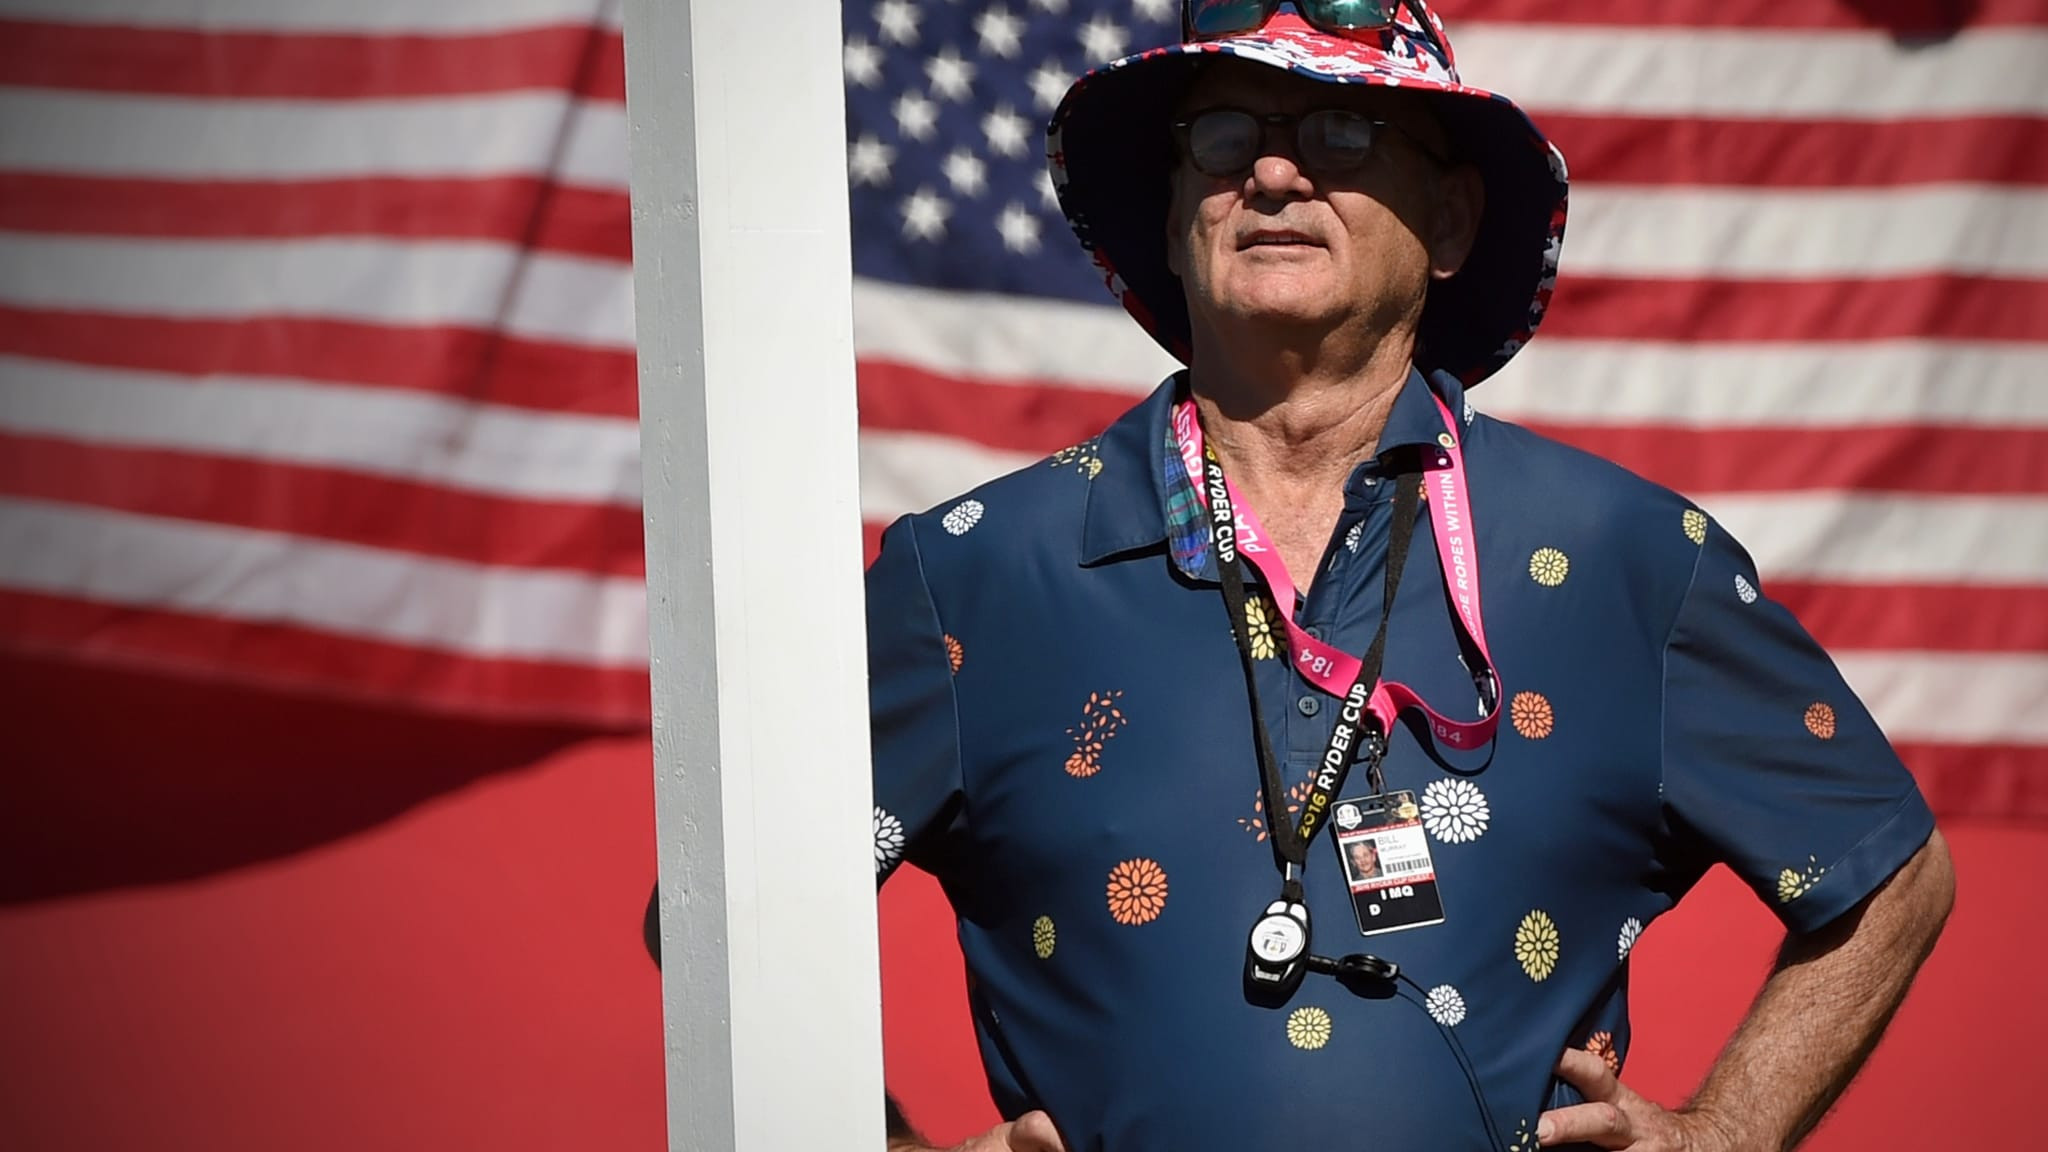 pictured: Bill Murray wearing William Murray Golf's Mums polo at the Ryder Cup (via AP)